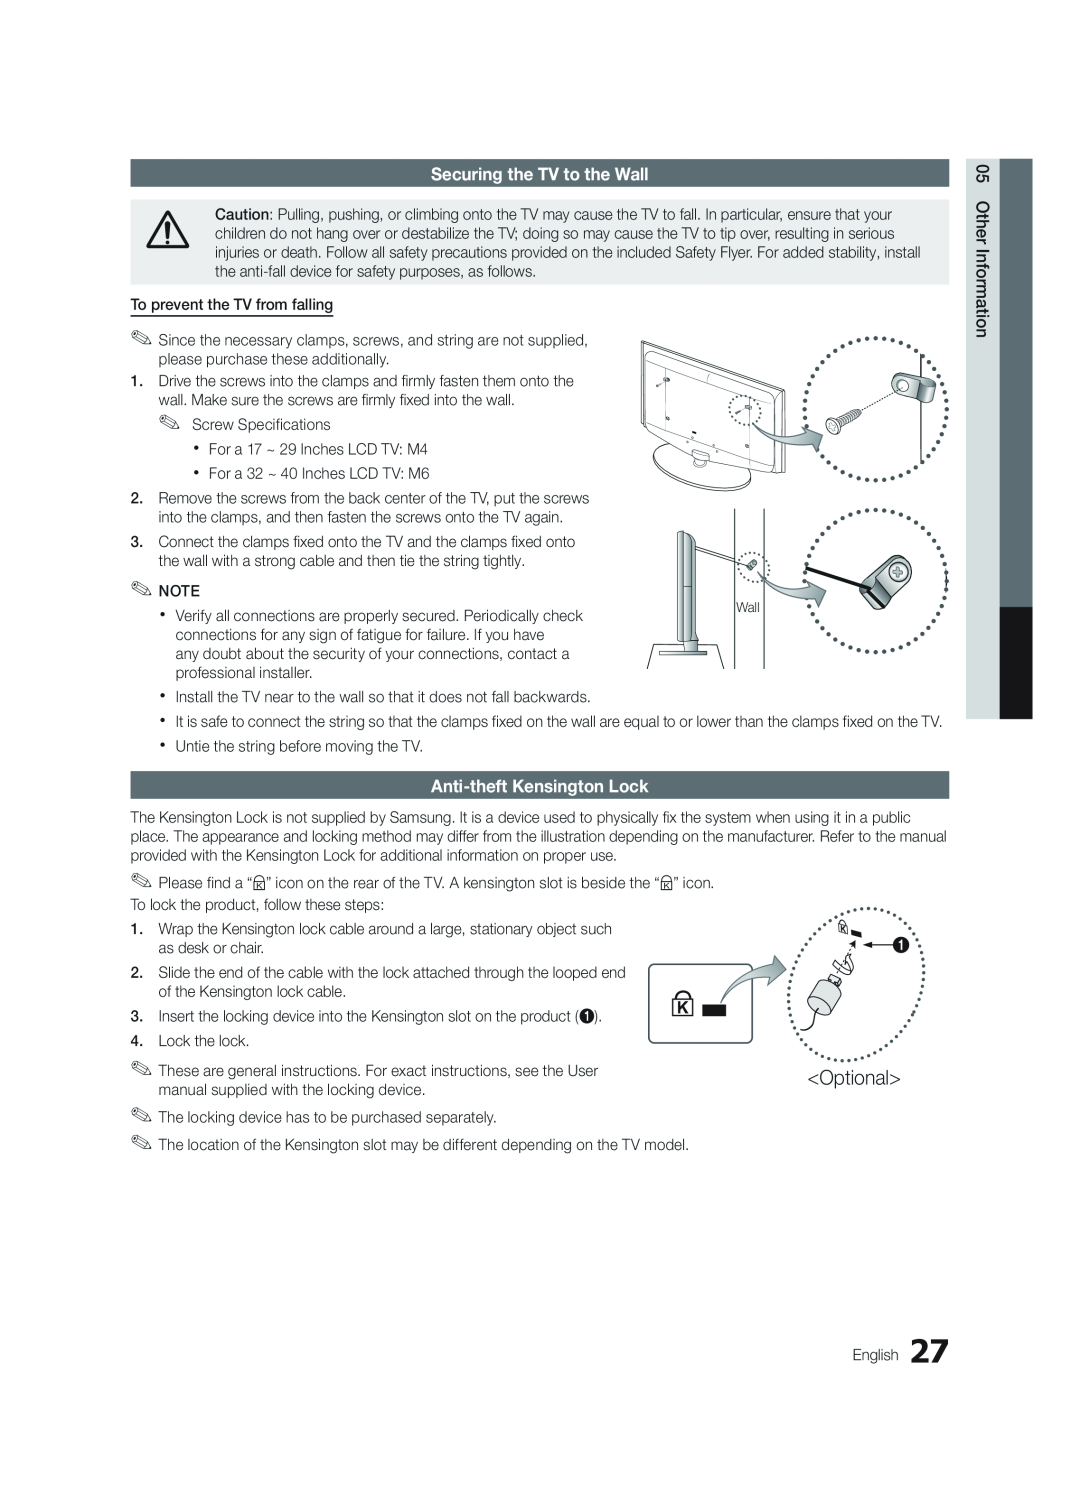 Samsung BN68-02620B-06 user manual Securing the TV to the Wall, Anti-theft Kensington Lock, Optional 